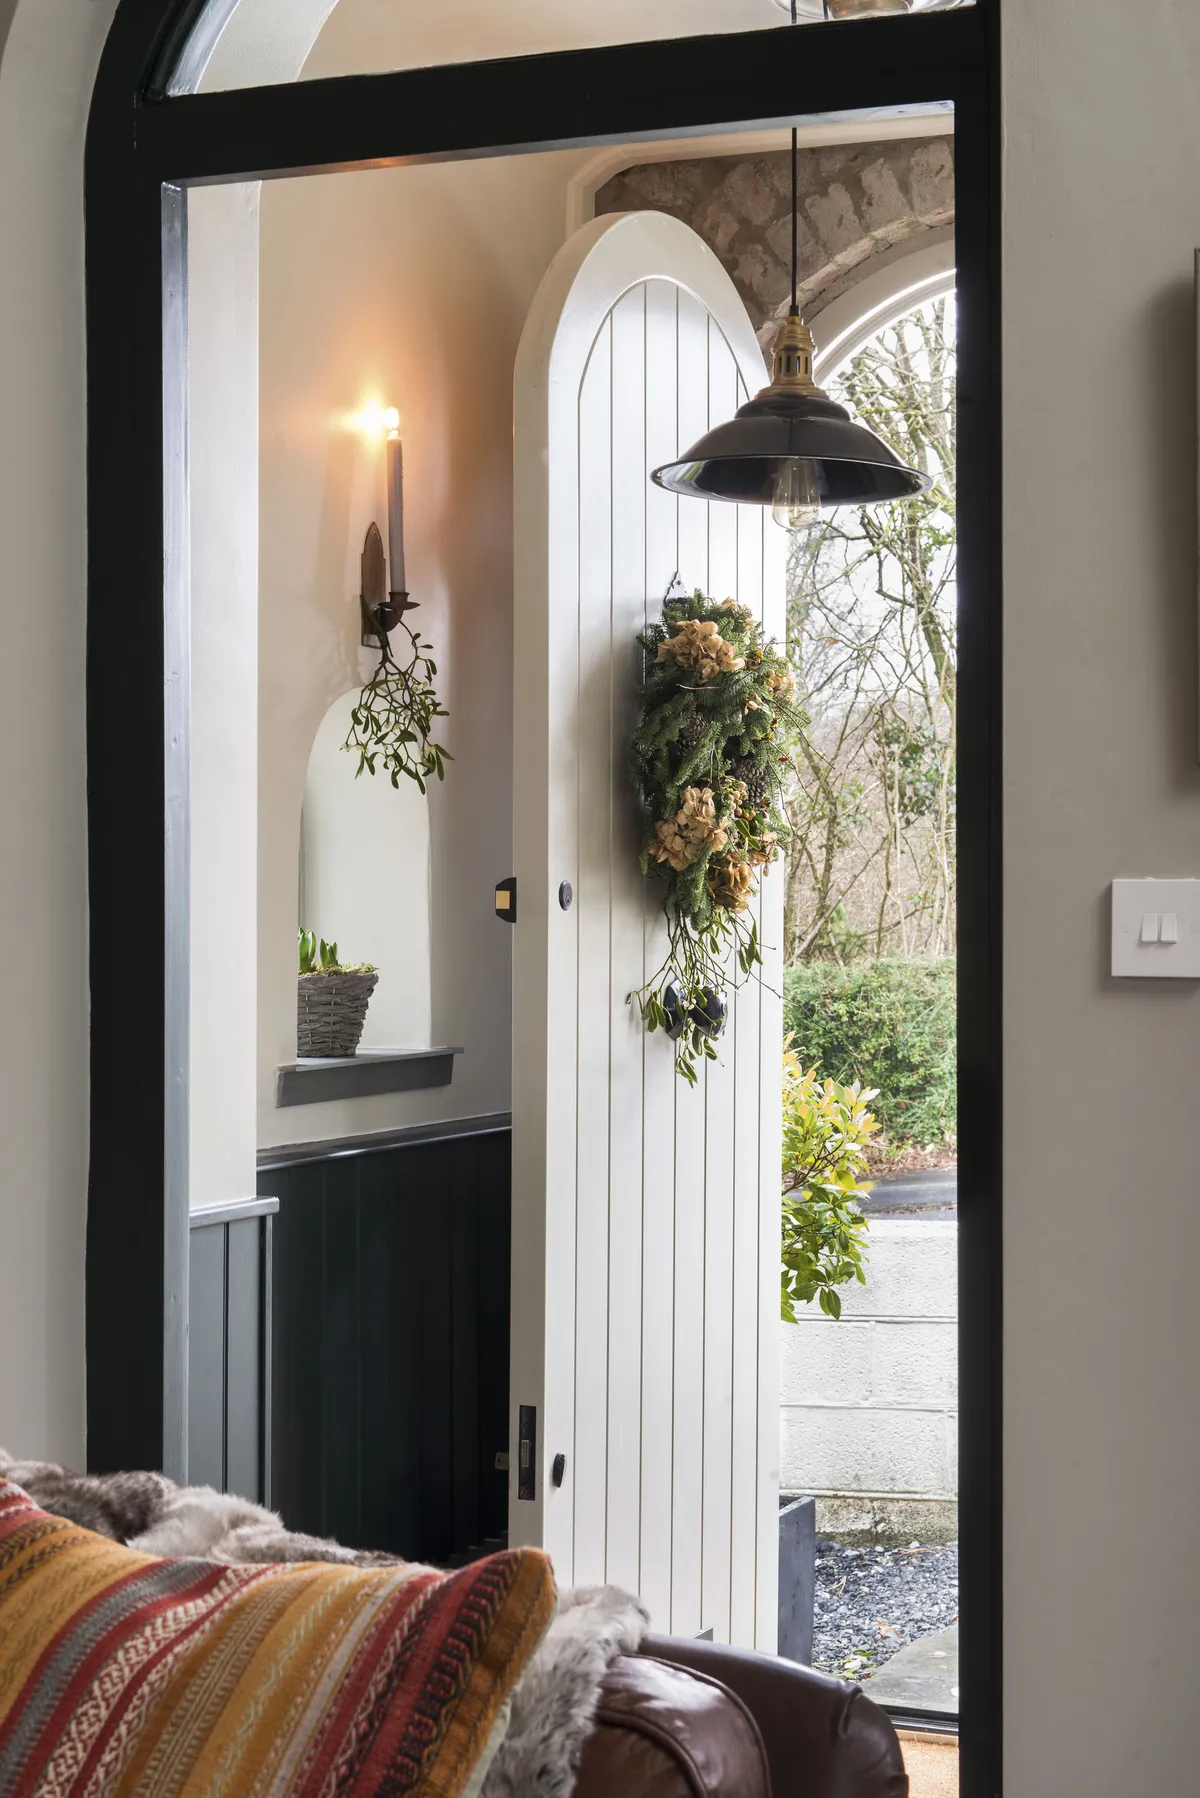 The internal double doors were full of flaws, all bowed and buckled with a rotting wooden frame that the couple repaired themselves. They also replaced the front door with a characterful one